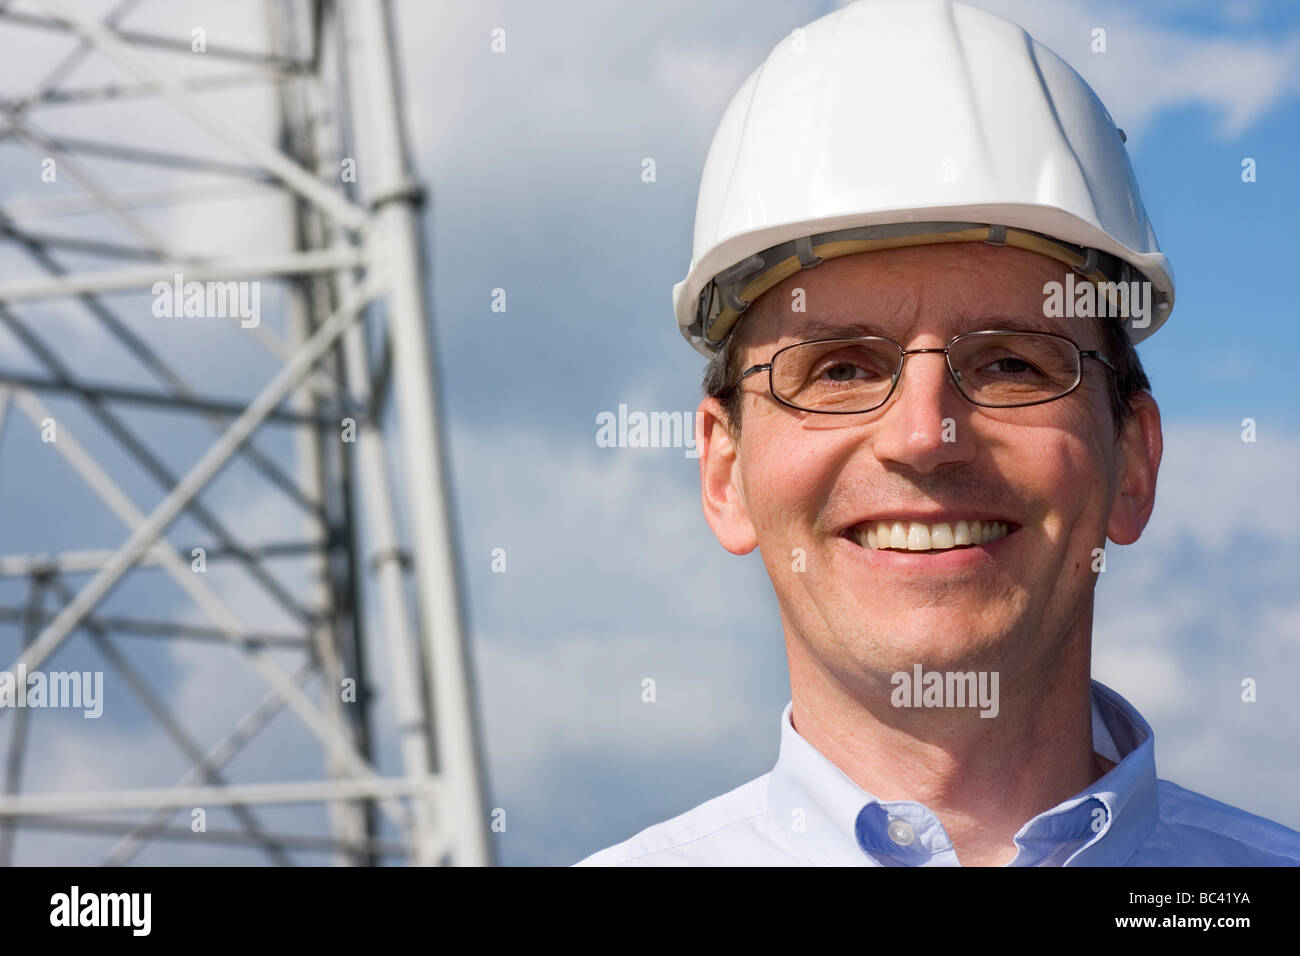 Smiling engineer with hardhat on construction site Stock Photo